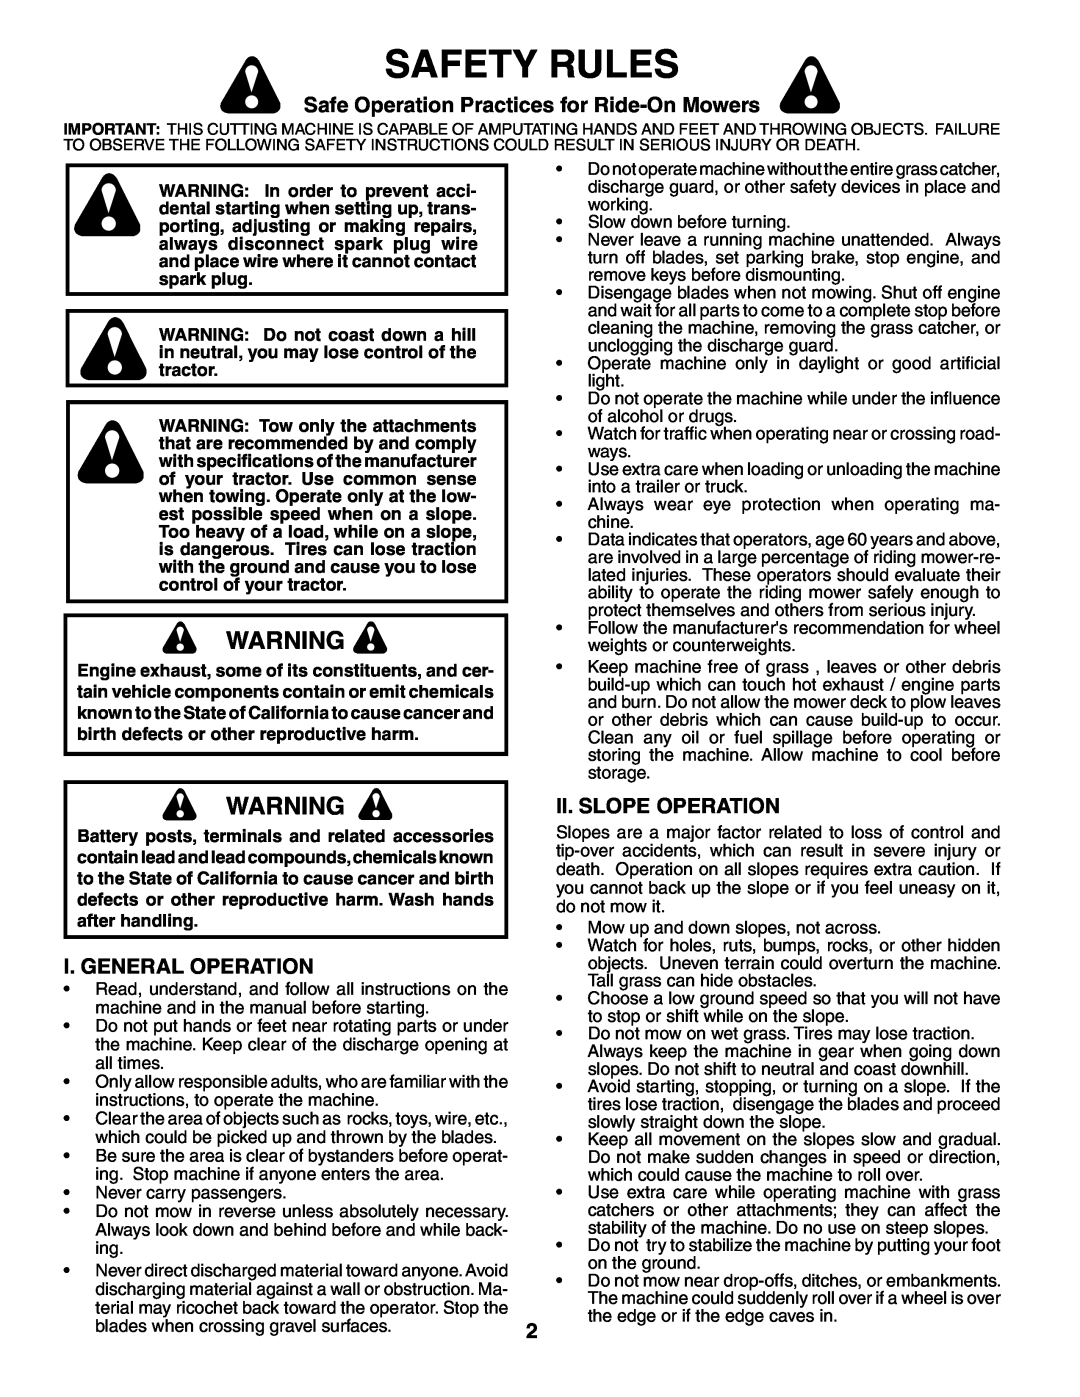 Poulan 96012004400 Safety Rules, Safe Operation Practices for Ride-On Mowers, I. General Operation, Ii. Slope Operation 